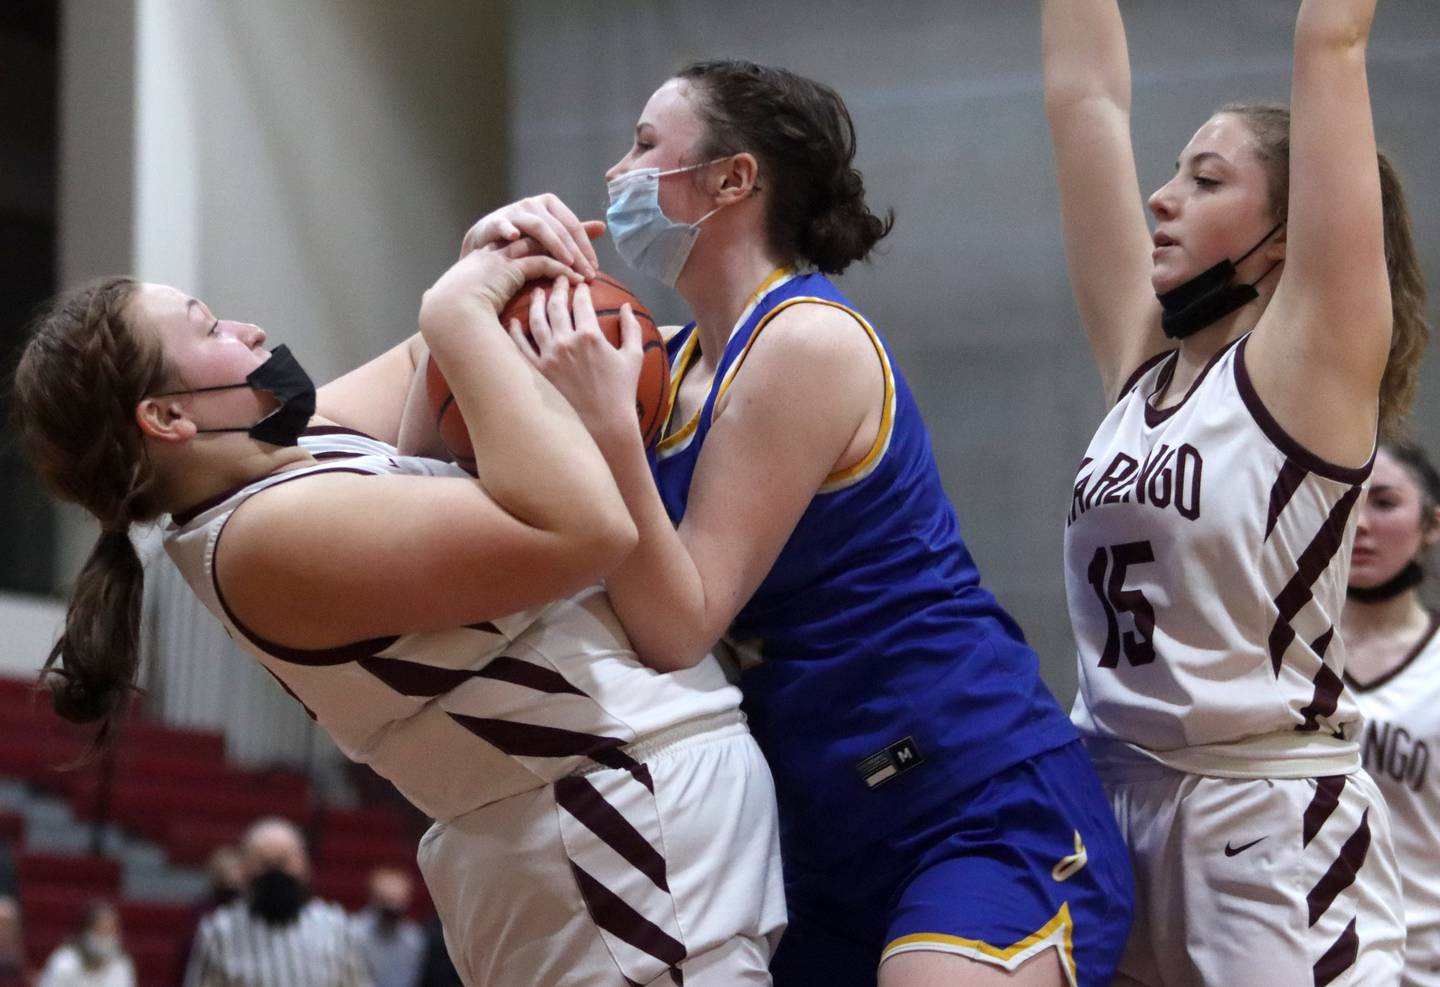 Marengo’s Morgan Coffman, left, tussles with Johnsburg’s Bella Saxelby for the ball as Marengo’s Gianna Almeida, right, keeps an eye on the action during girls varsity basketball action in Marengo Thursday night.